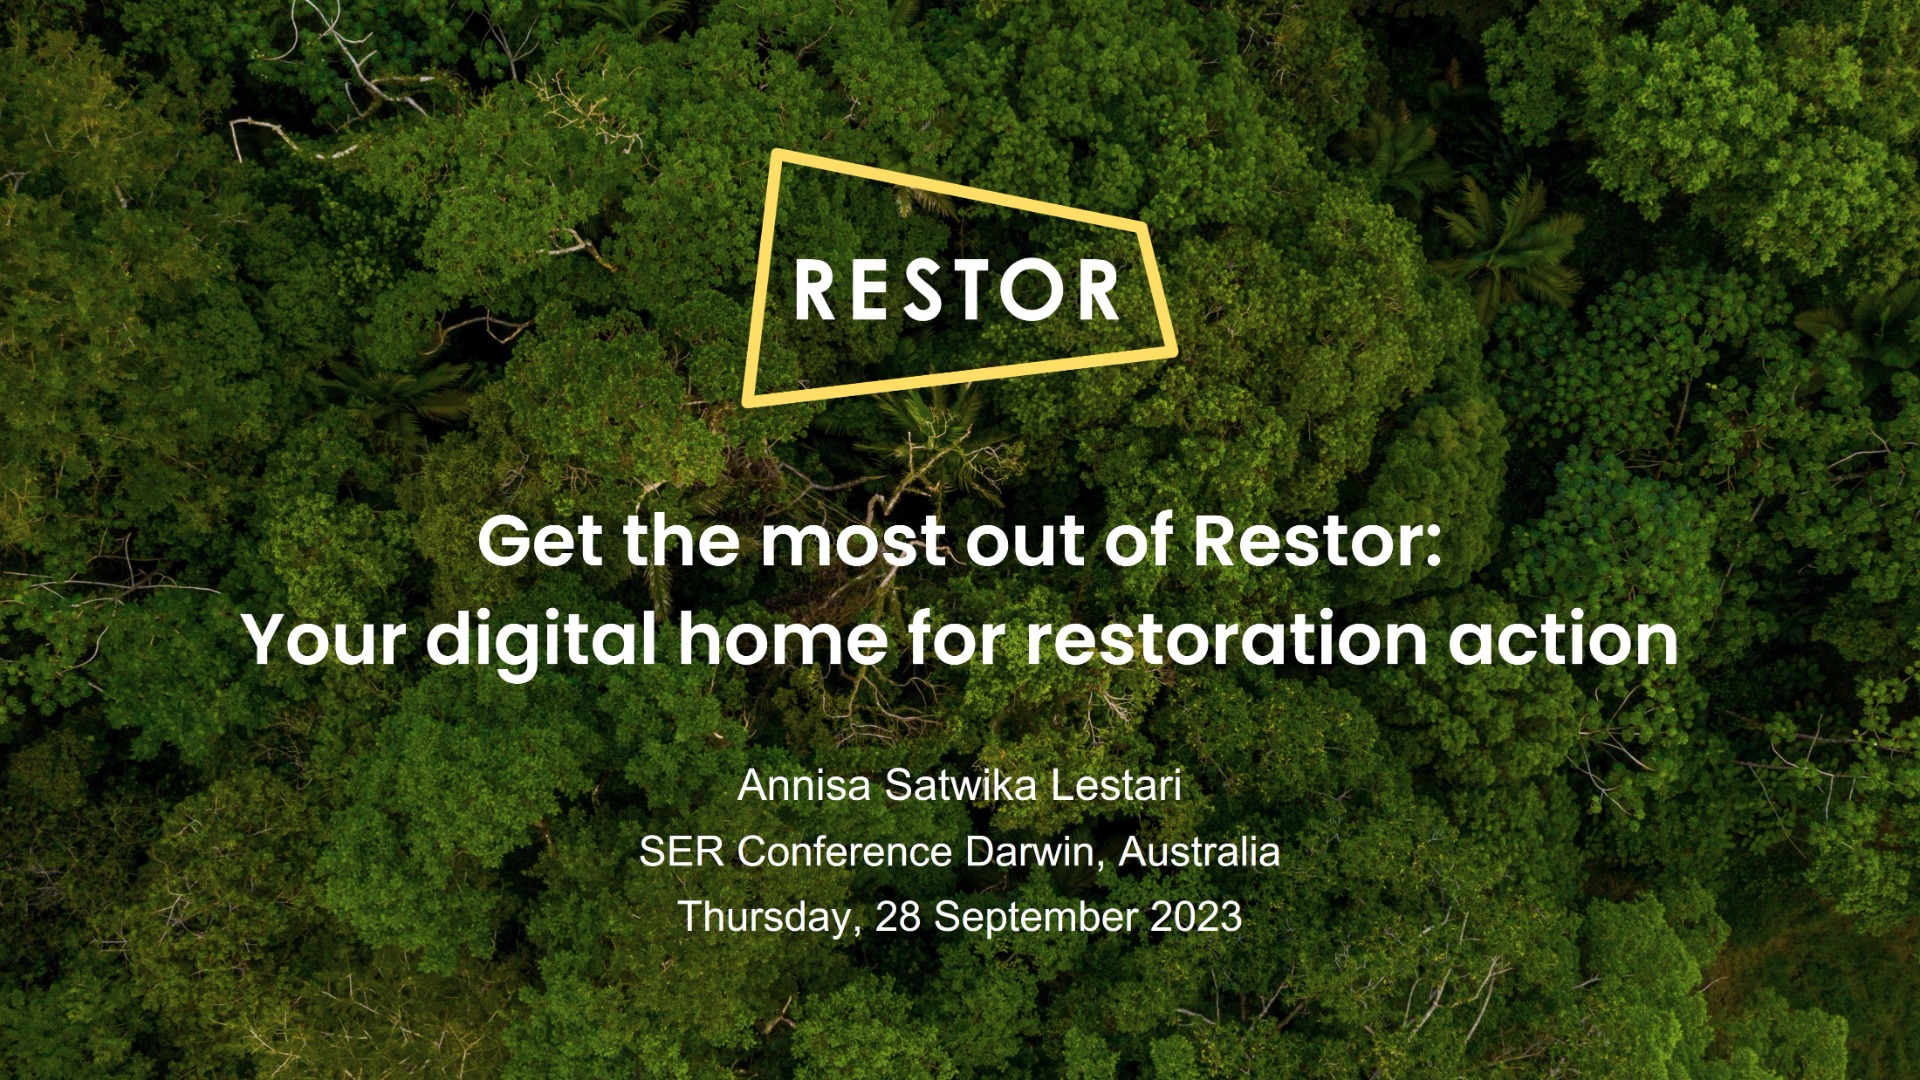 Workshop #75 Get the most out of Restor: Your digital home for restoration action. Organiser: Simeon Max